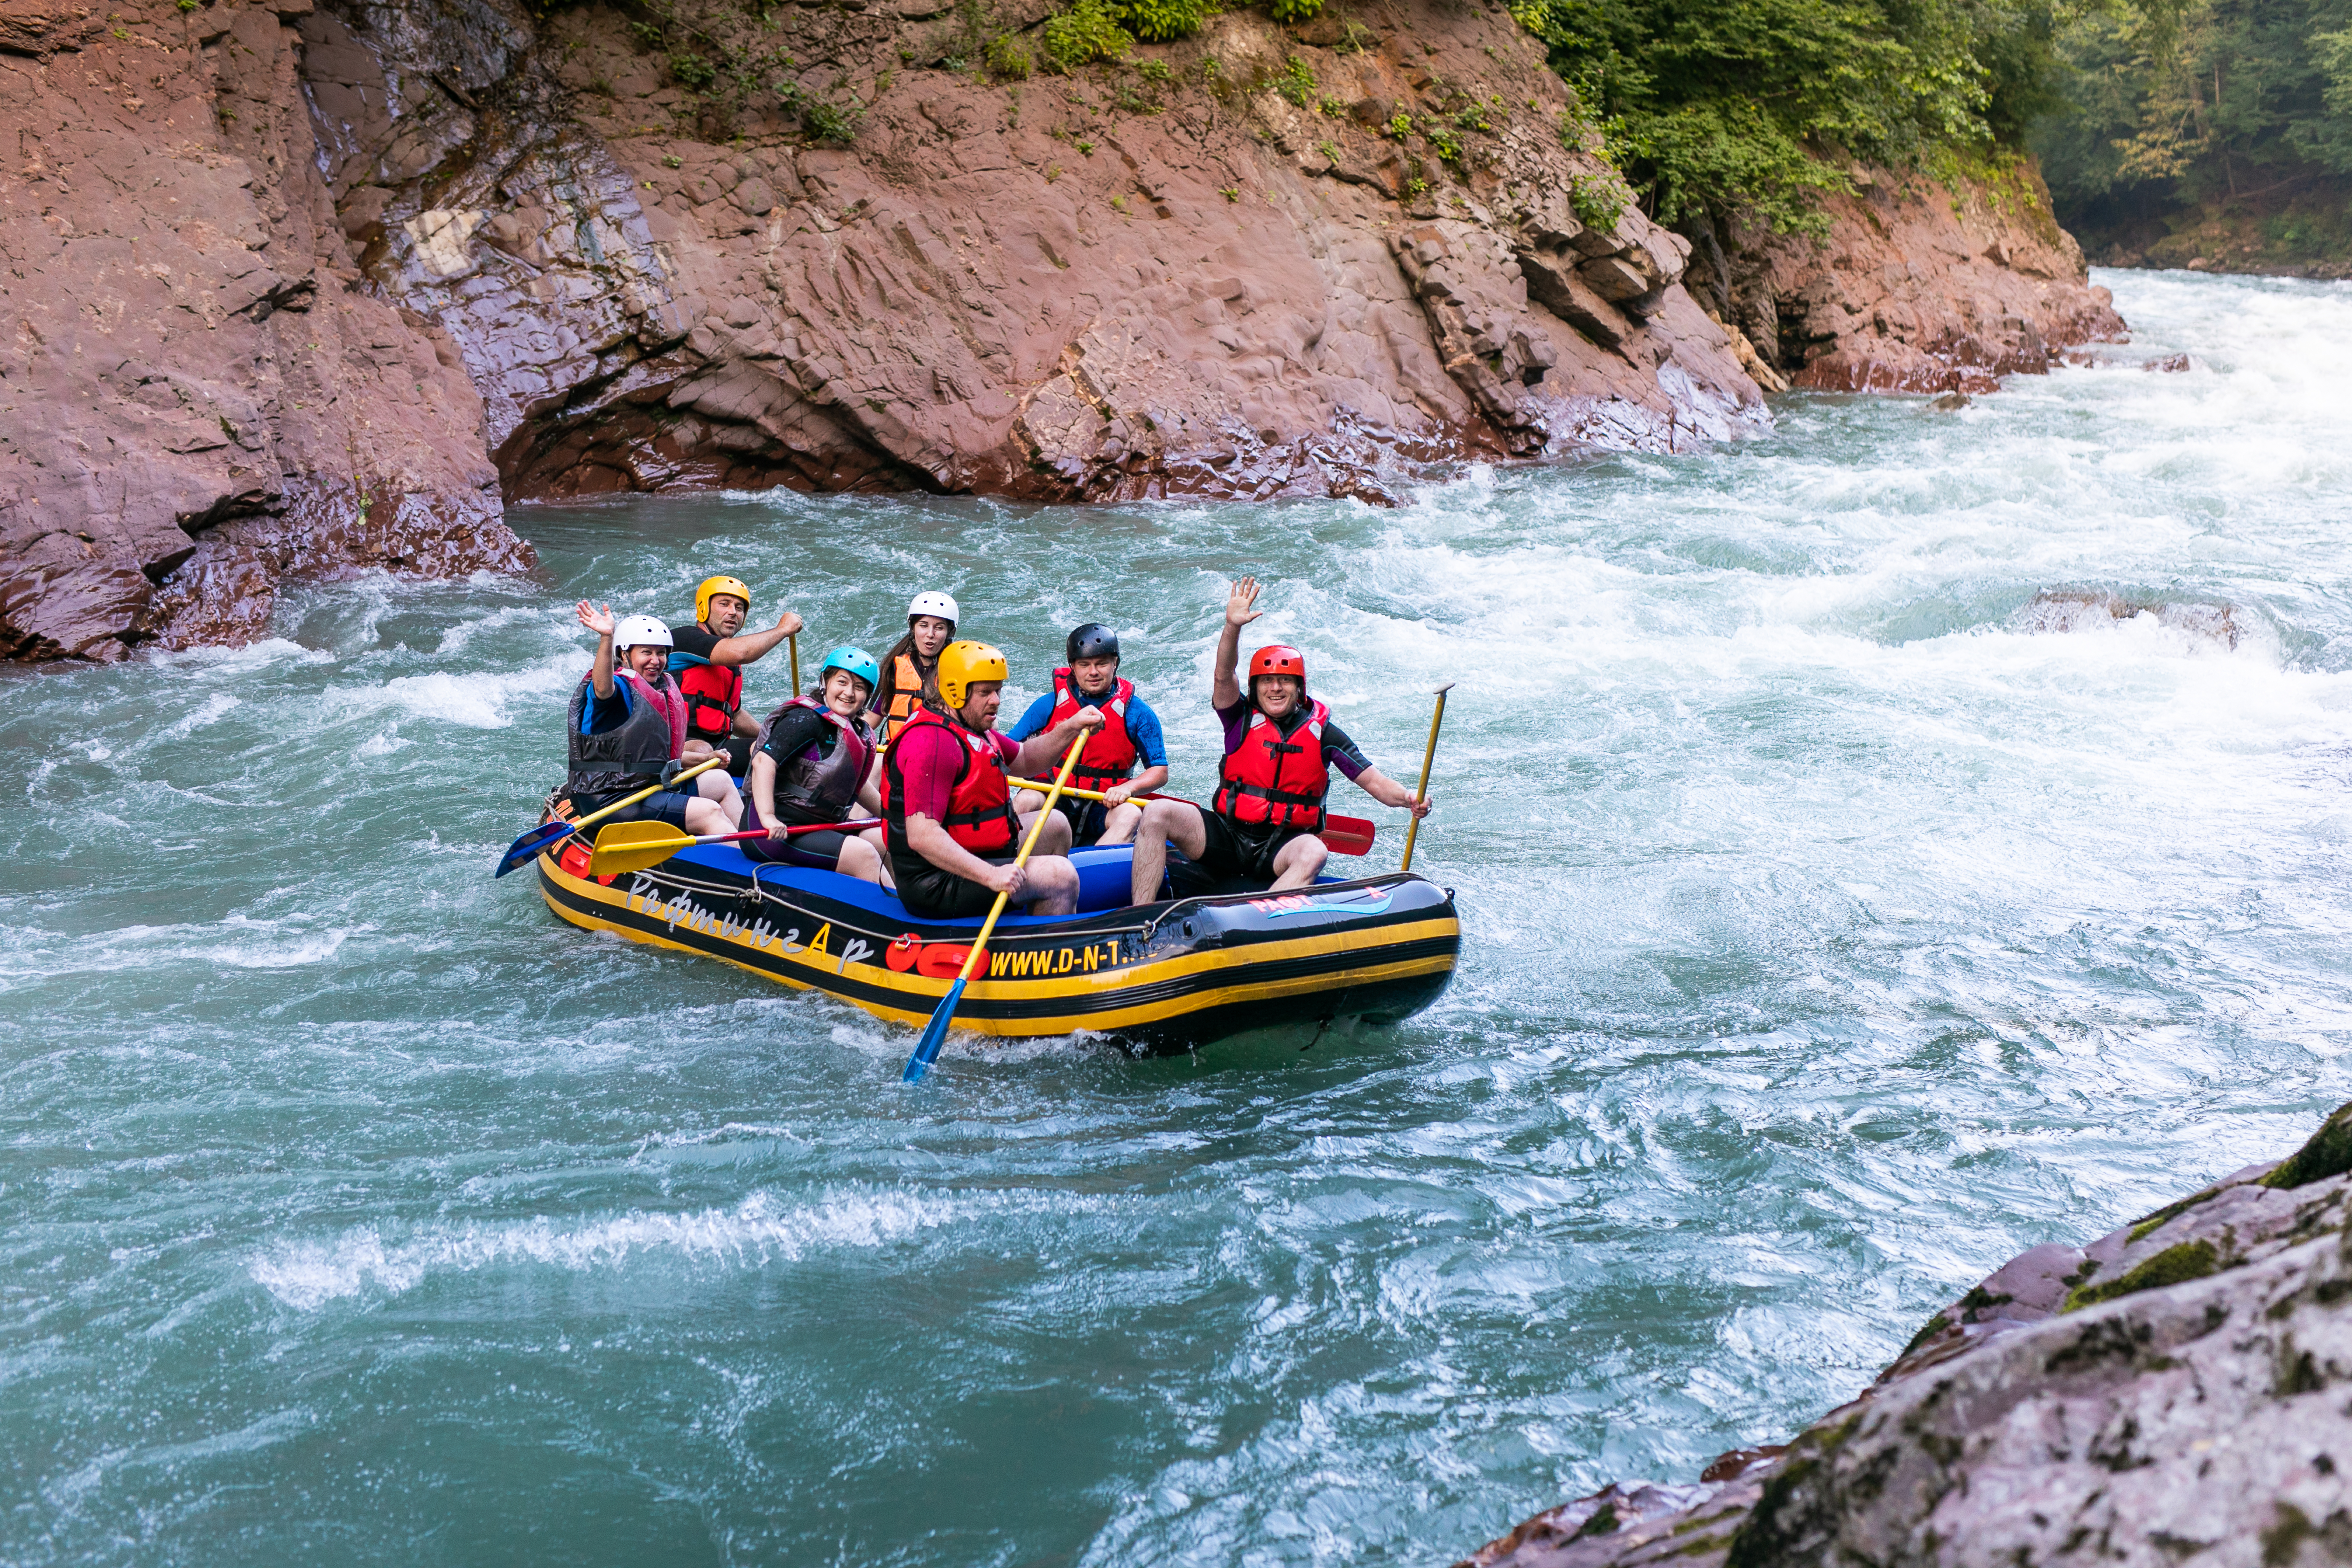 group-men-women-are-rafting-river-extreme-fun-sport